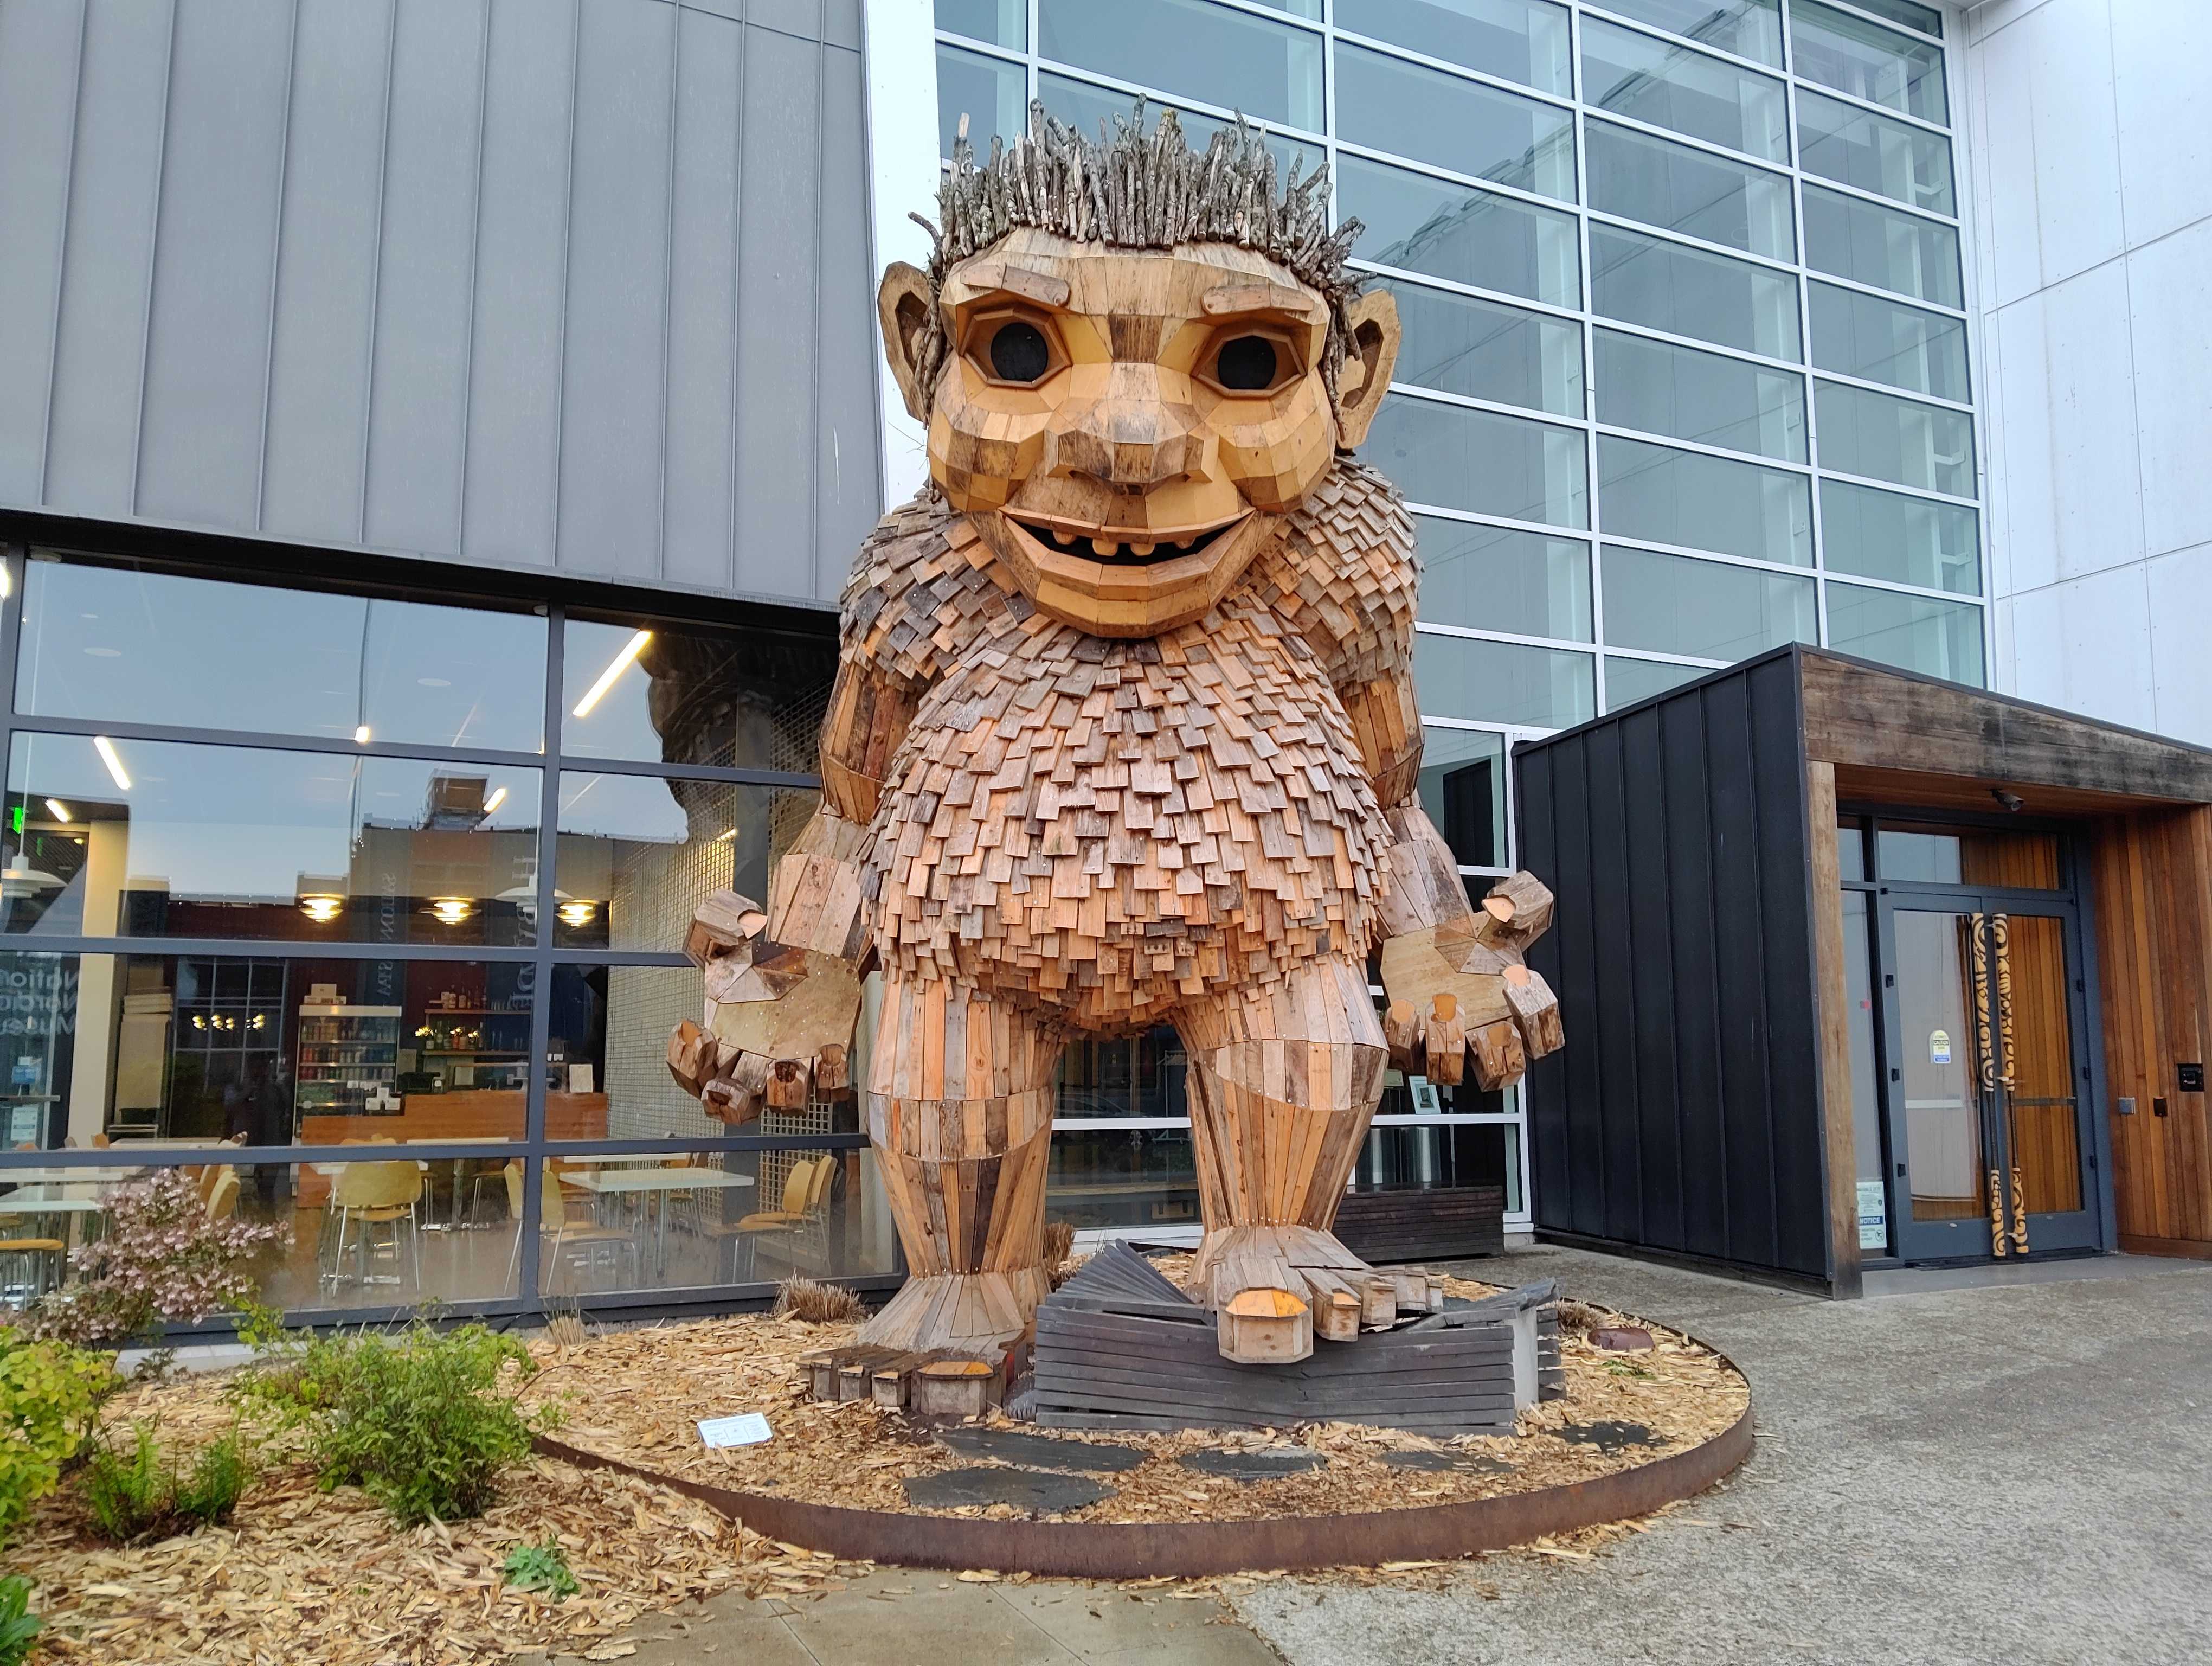 A wooden statue of a troll